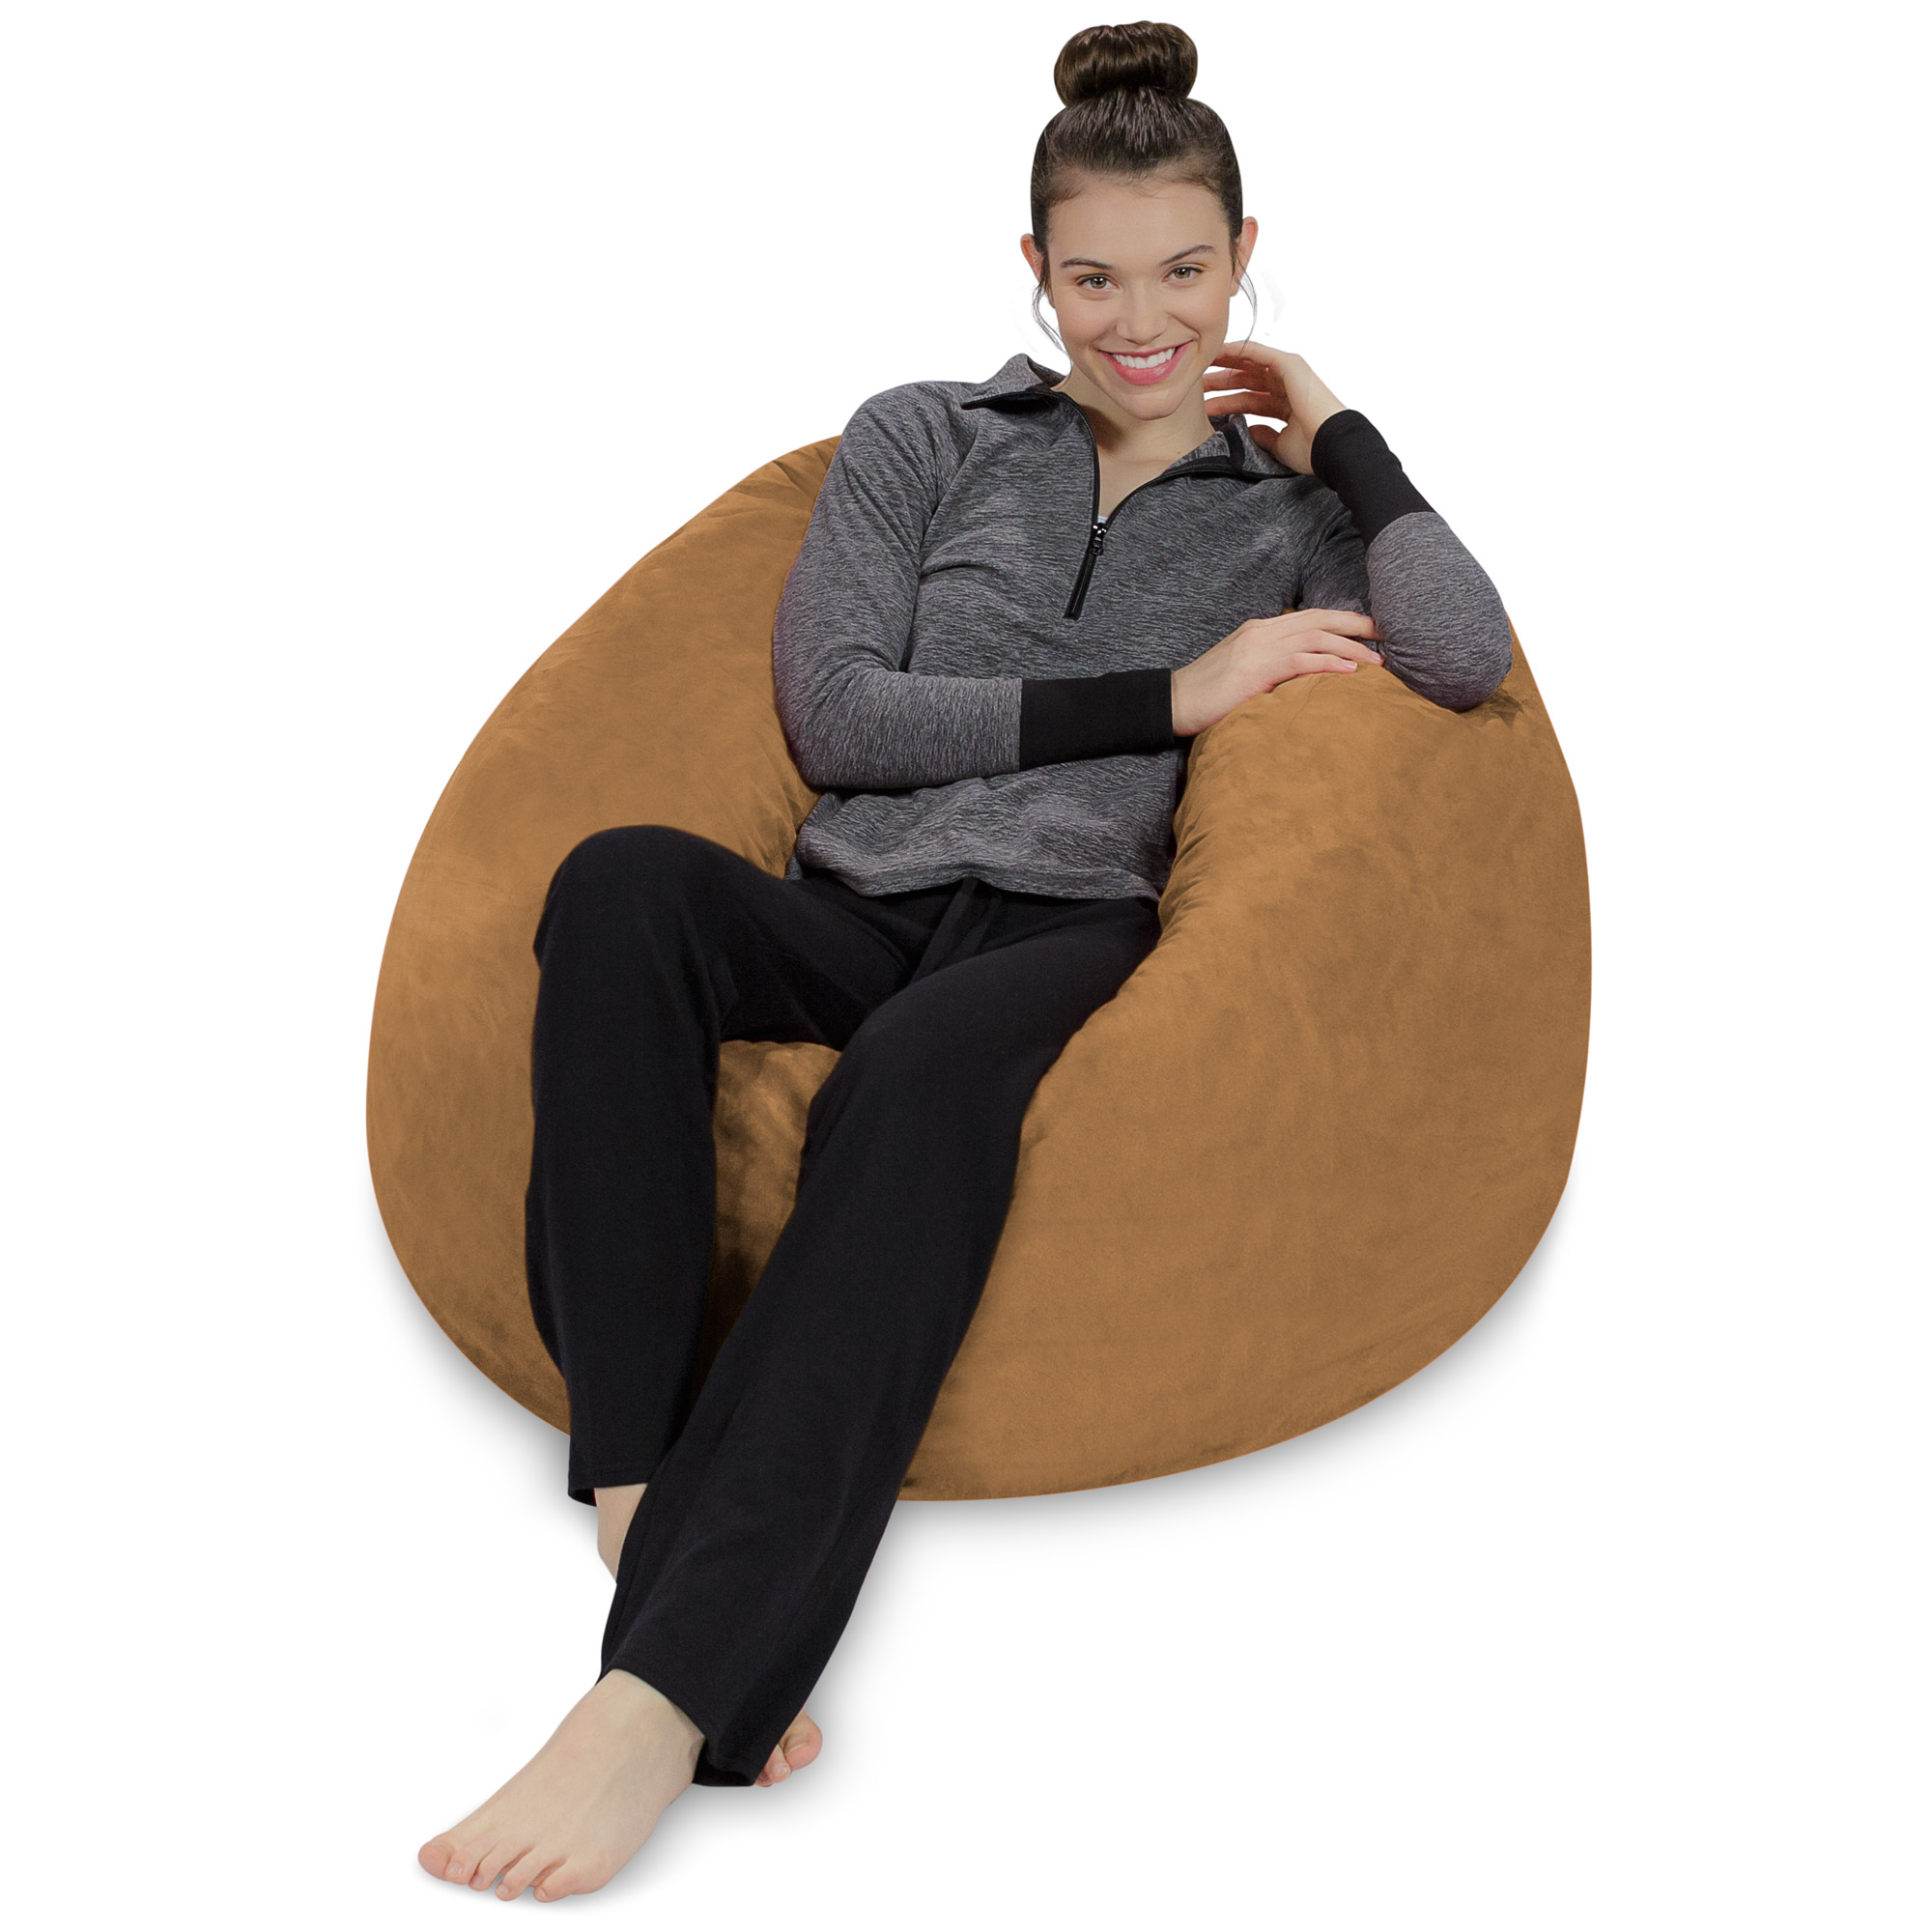 Sofa Sack Bean Bag Chair, Memory Foam Lounger with Microsuede Cover, Kids, 3 ft, Cocoa - image 3 of 5